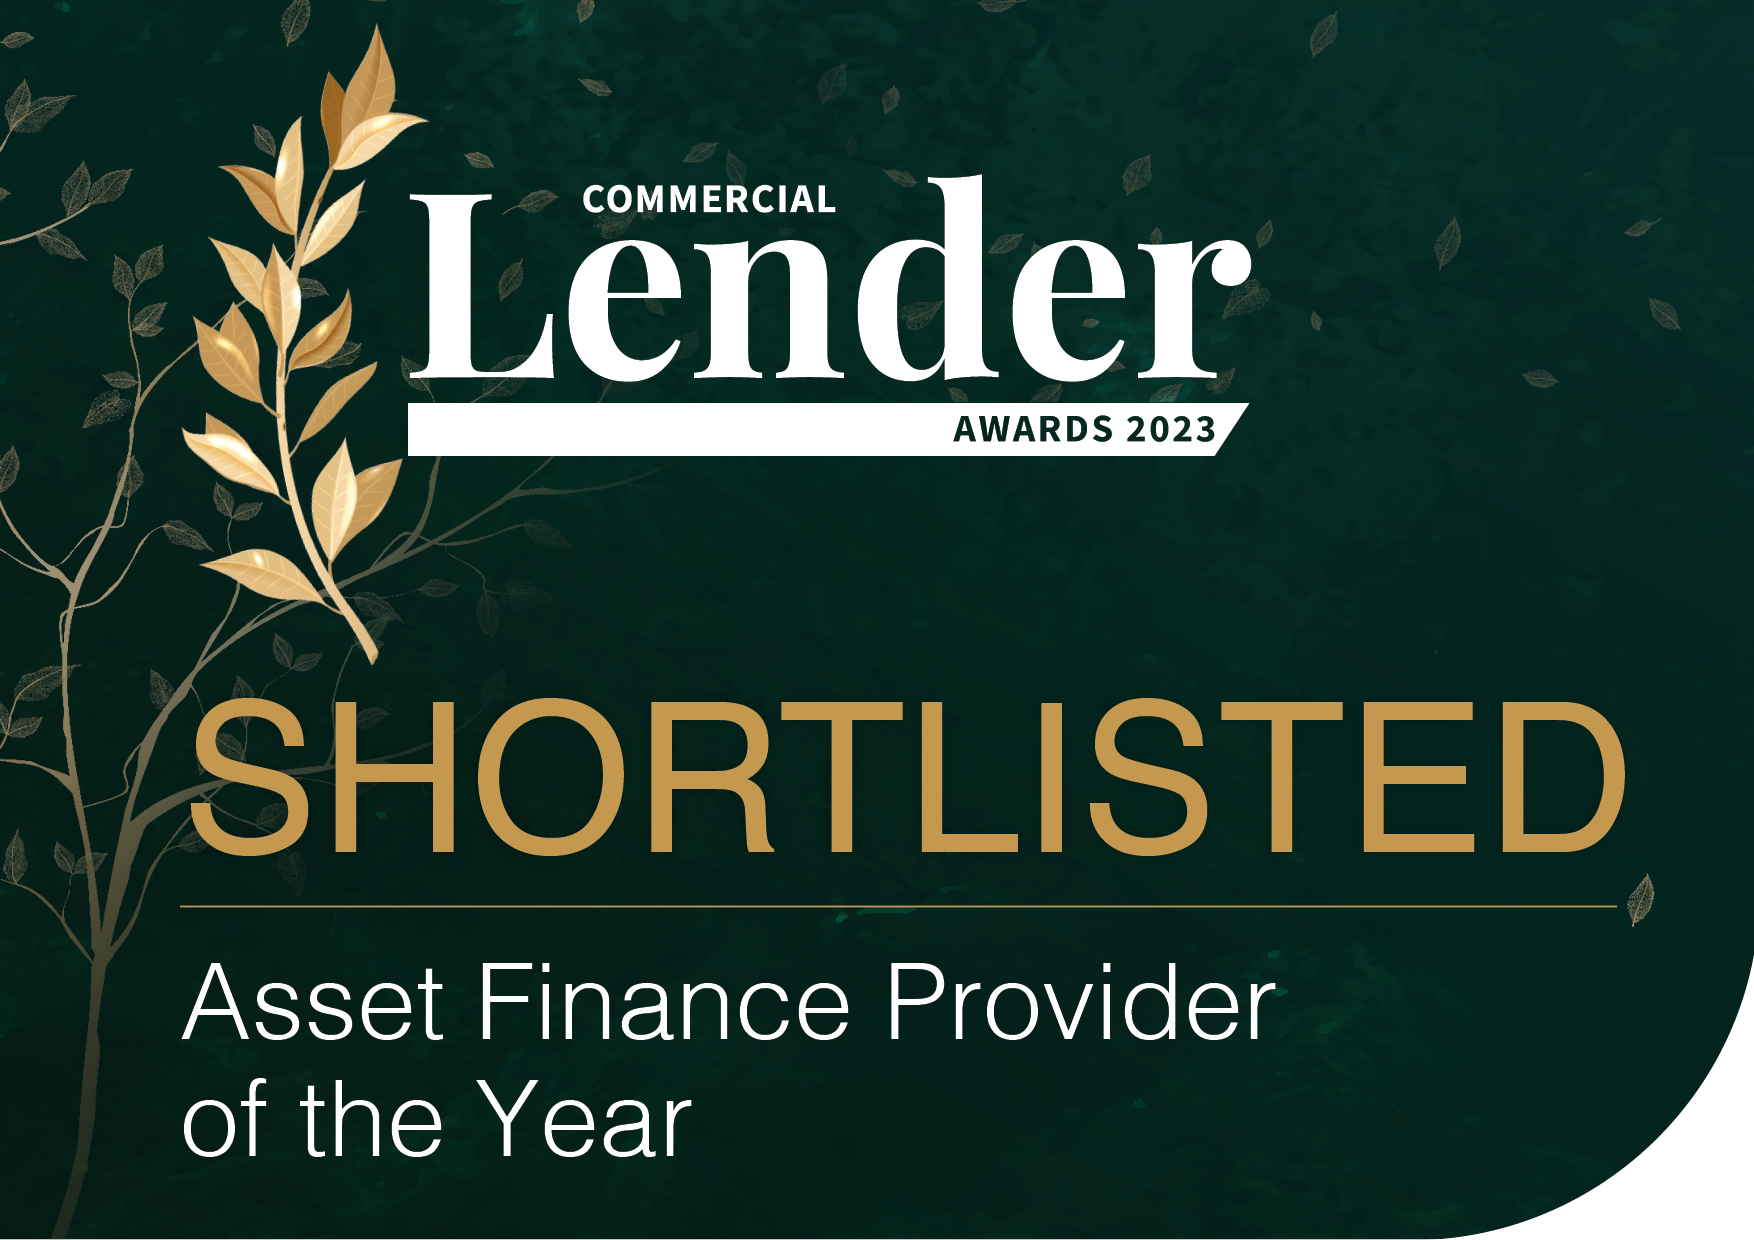 NACFB Commercial Lender Awards 2023 - Shortlisted - Asset Finance Provider of the Year